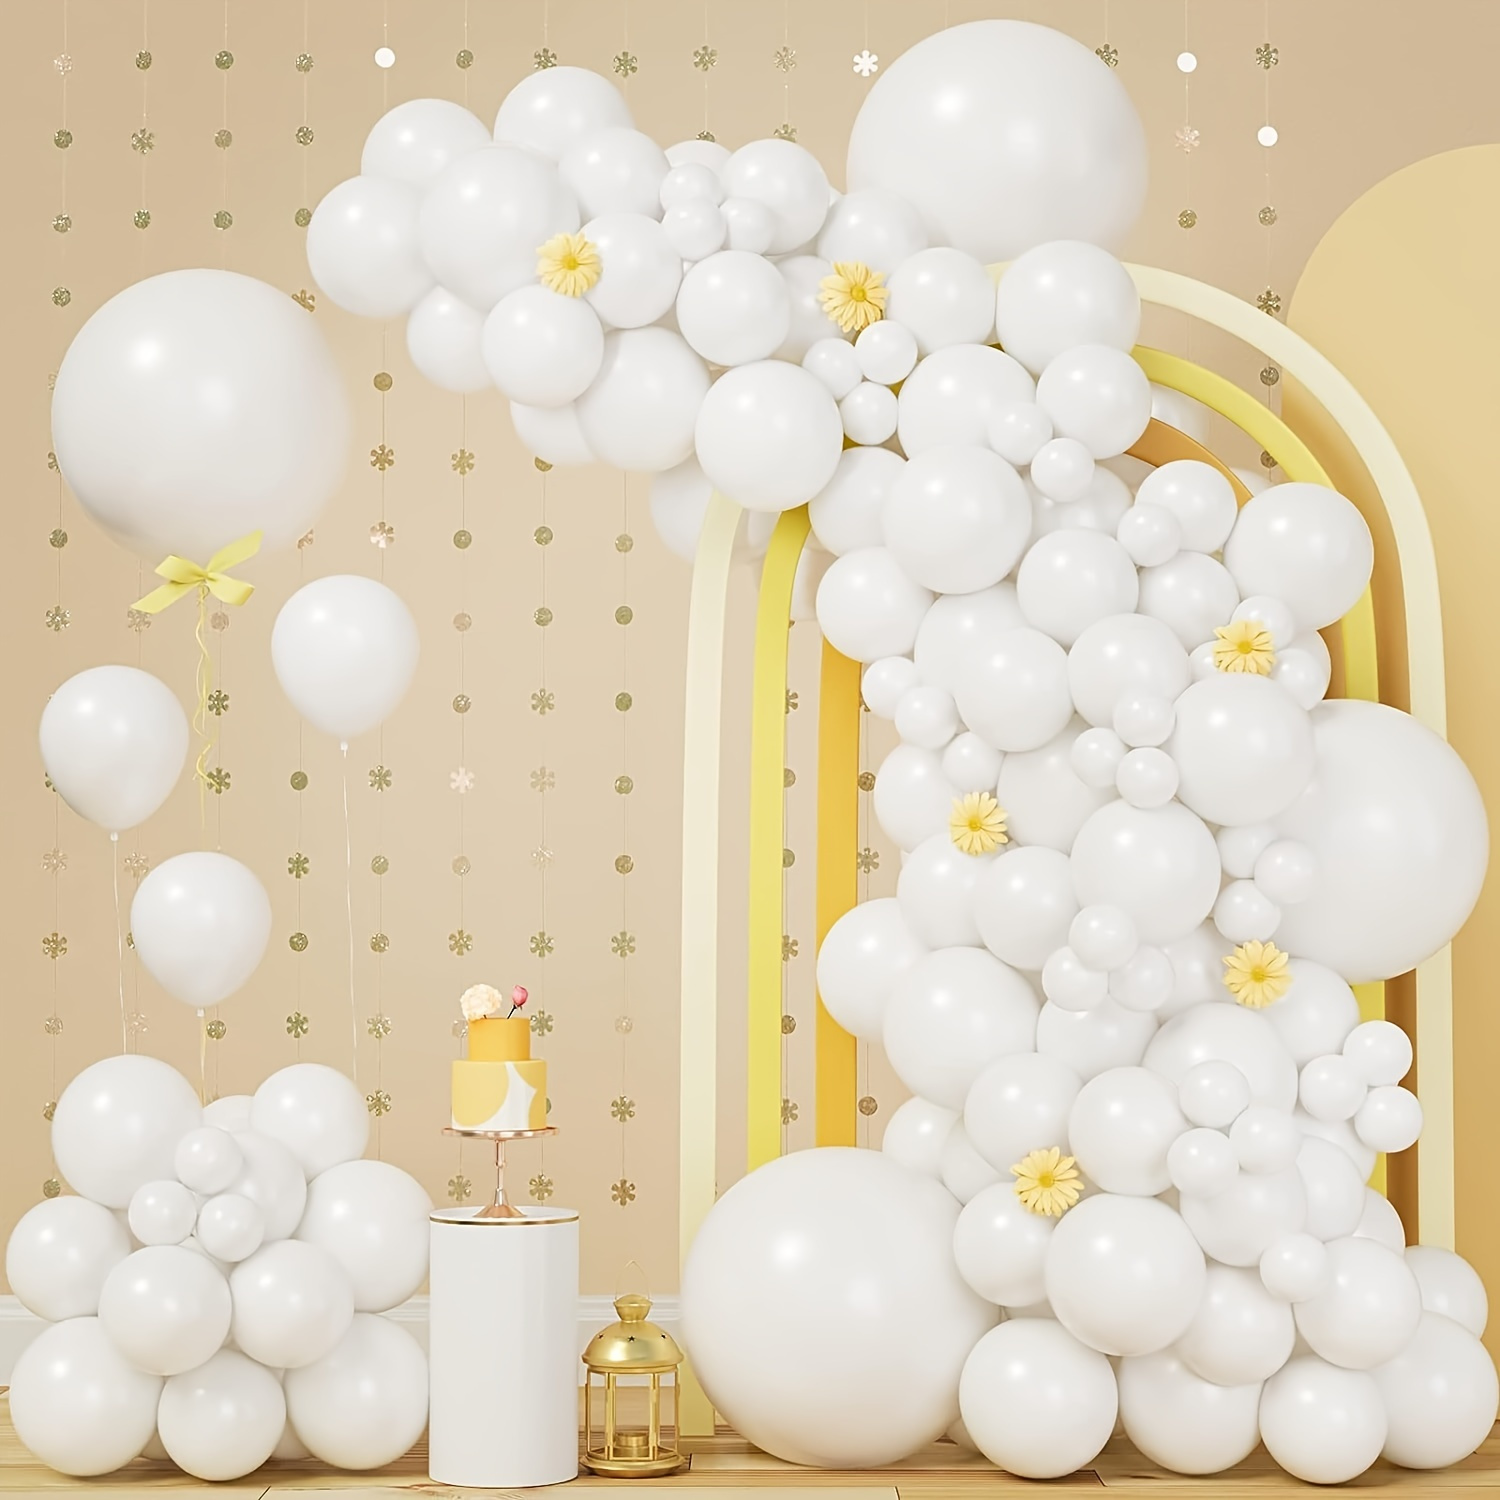 12pcs, Dove Balloons Memorial Release In Sky, White Angel Lanterns Funeral  Party Decorations For Loss Of Loved One, Celebration Of Life Favors, Happy  Birthday In Heaven Rip Supplies, High-quality & Affordable